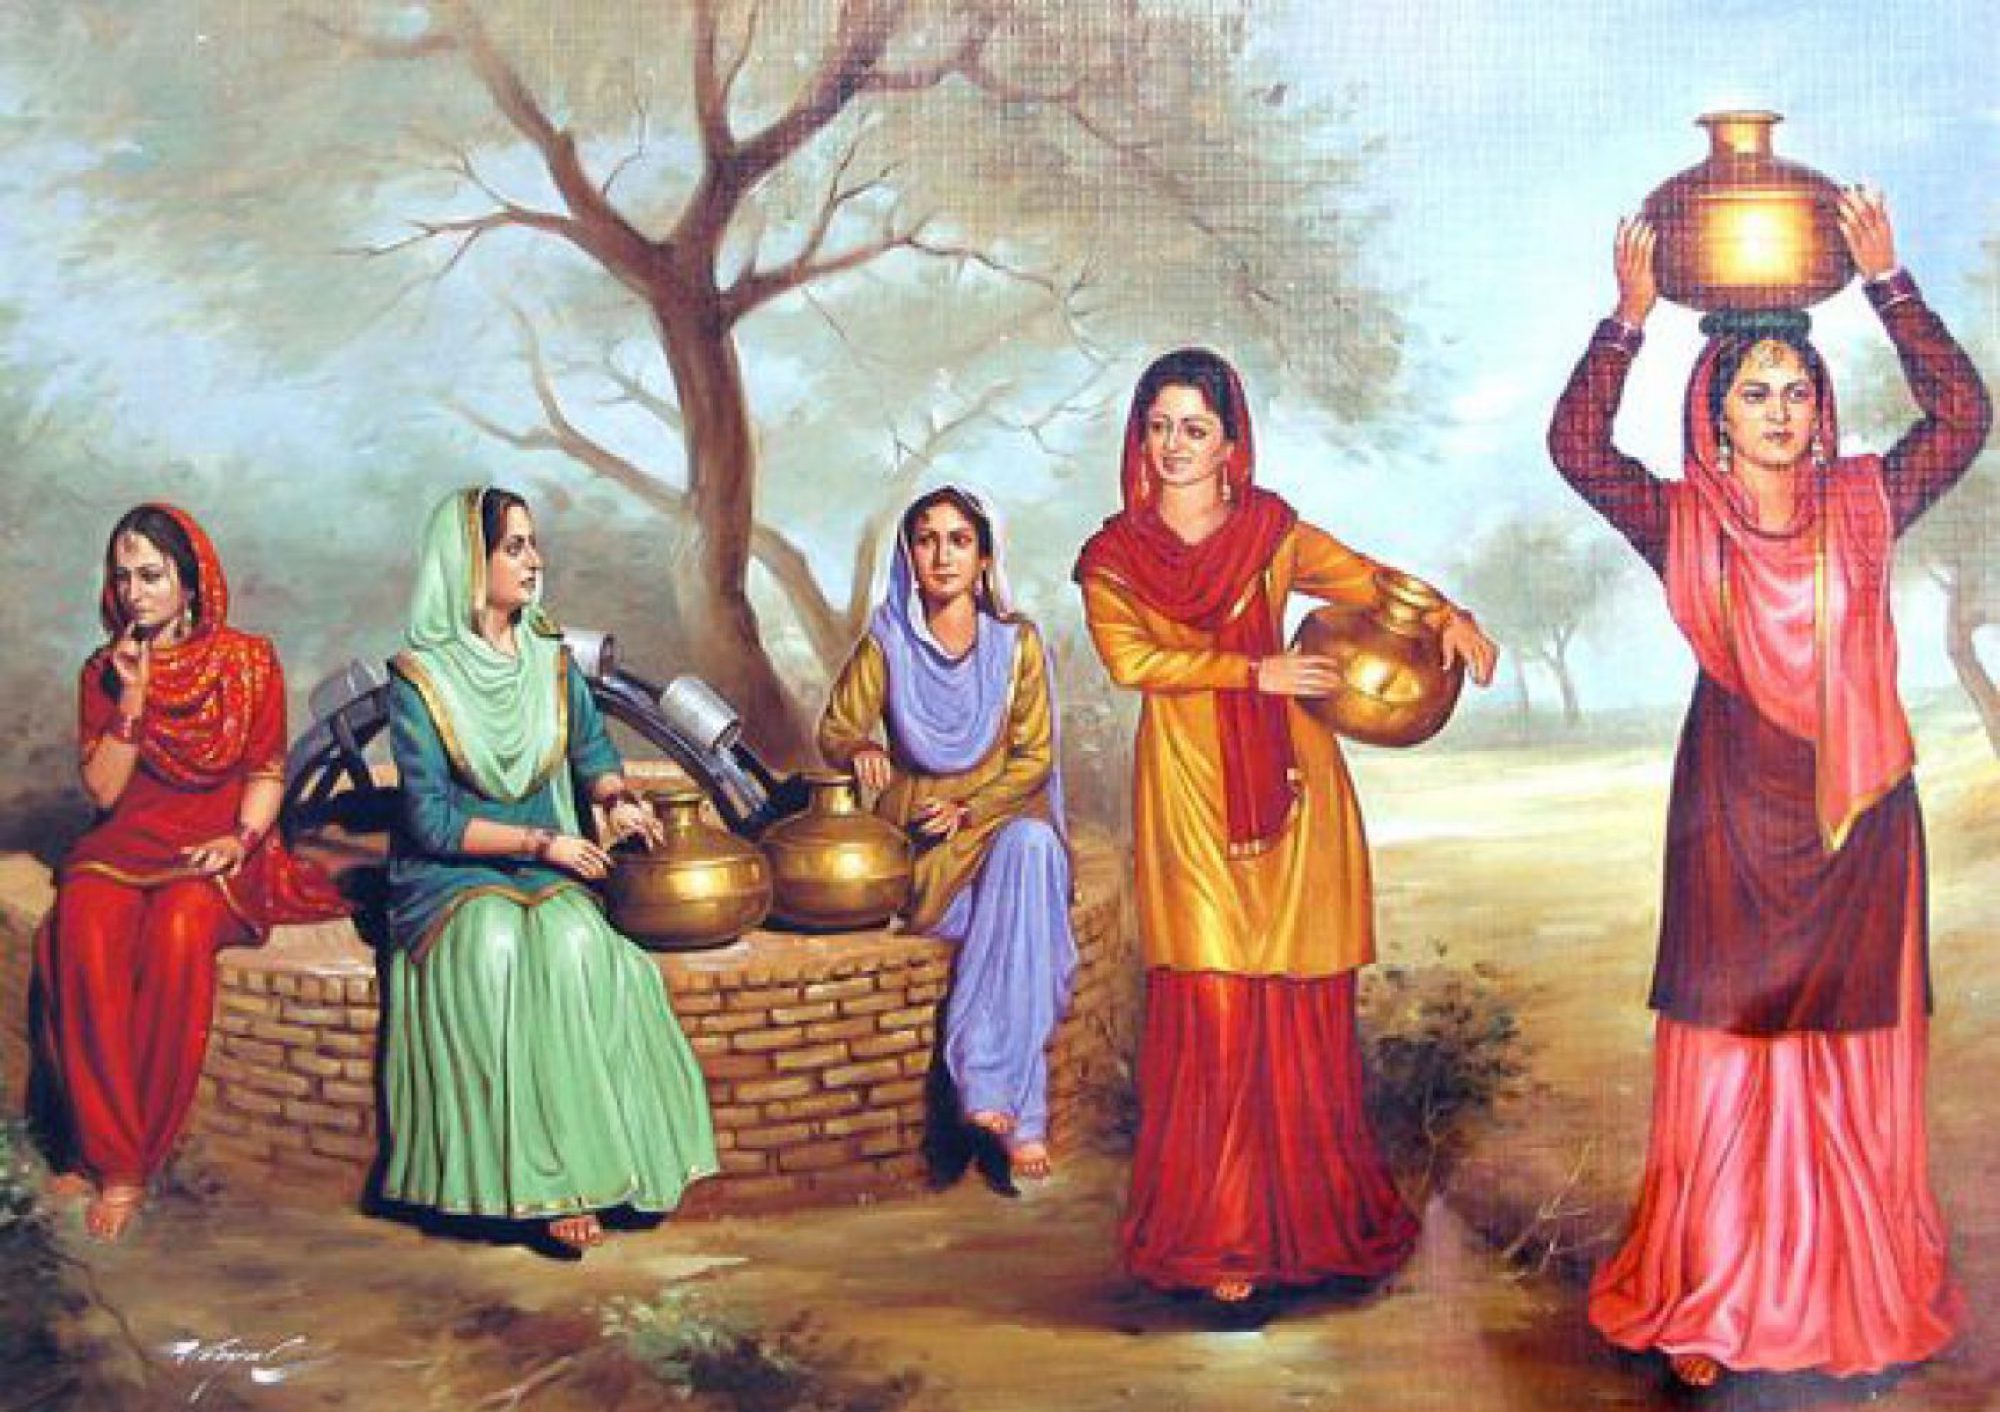 Punjab Culture Day to be observed today, March 14